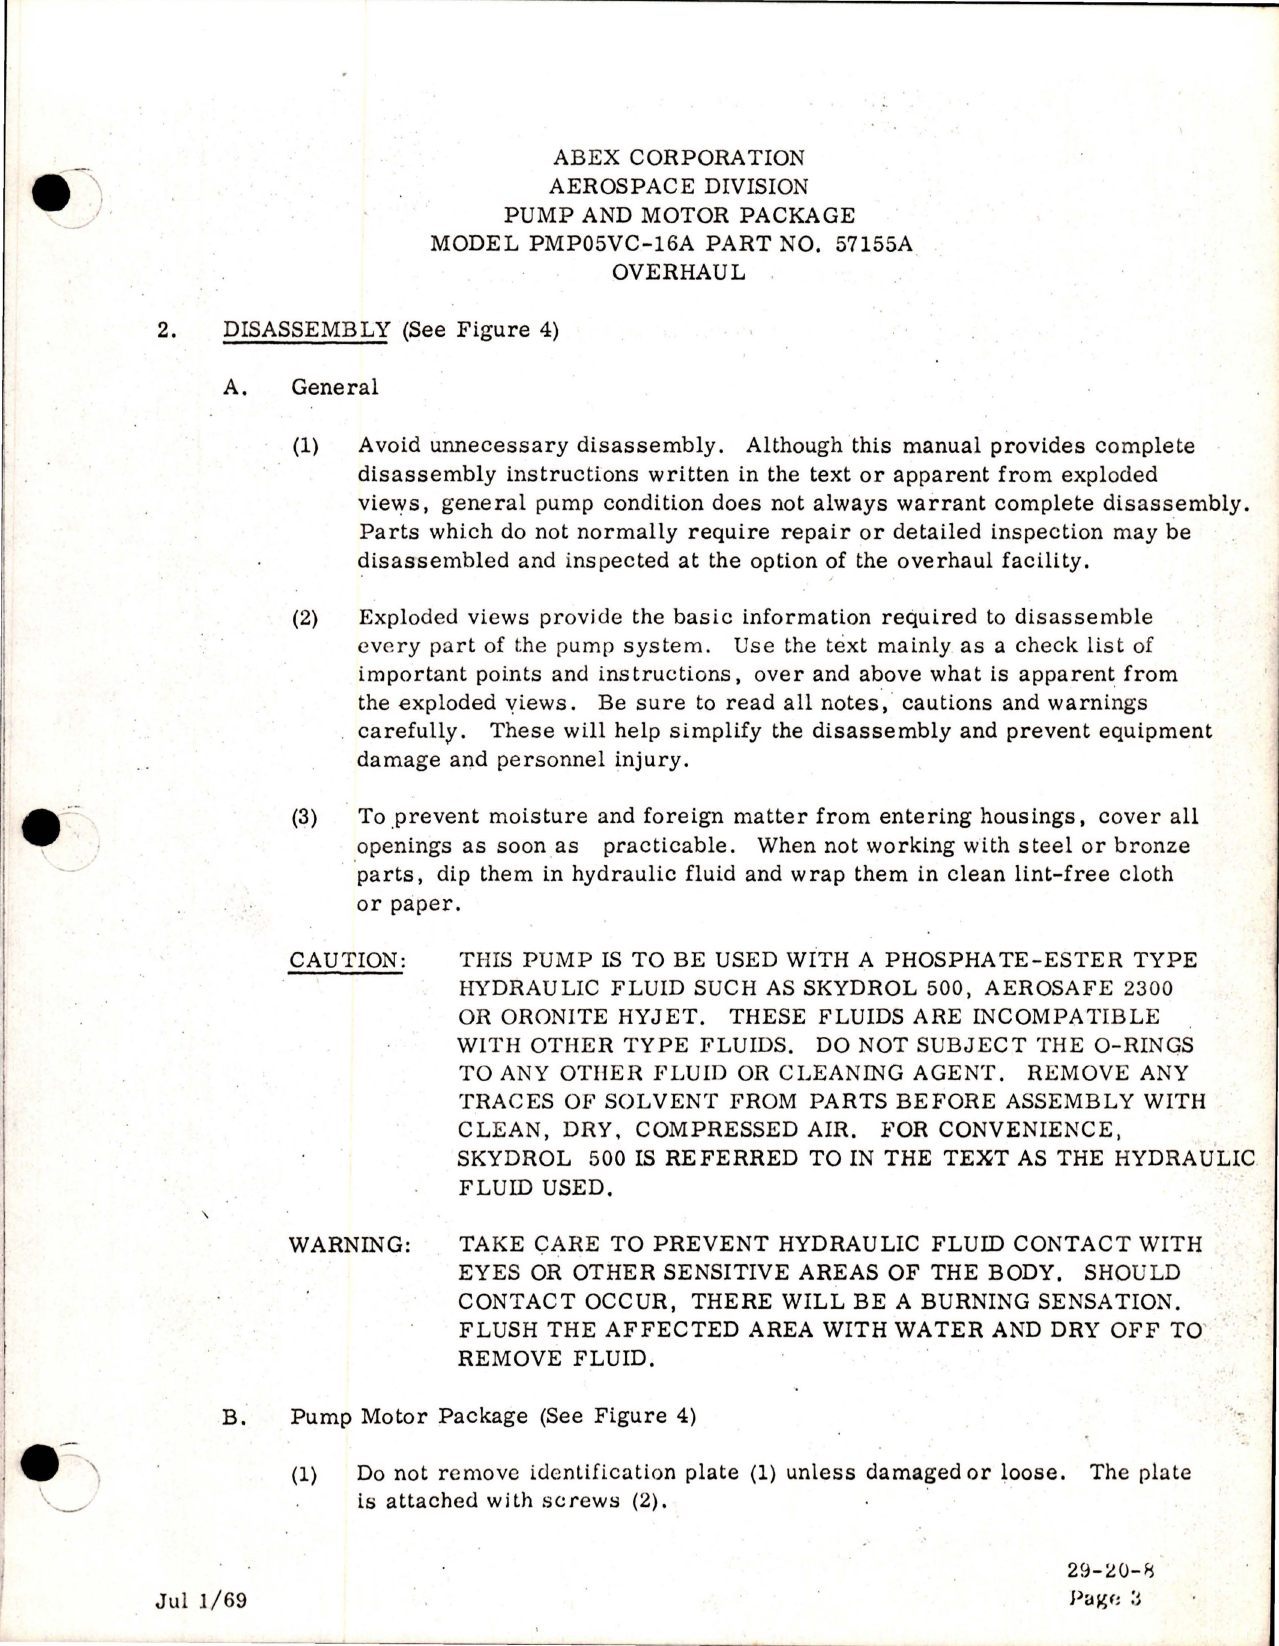 Sample page 7 from AirCorps Library document: Overhaul Manual for Hydraulic Pump and Motor Package - Part 57155A - Model PMP05VC-16A 